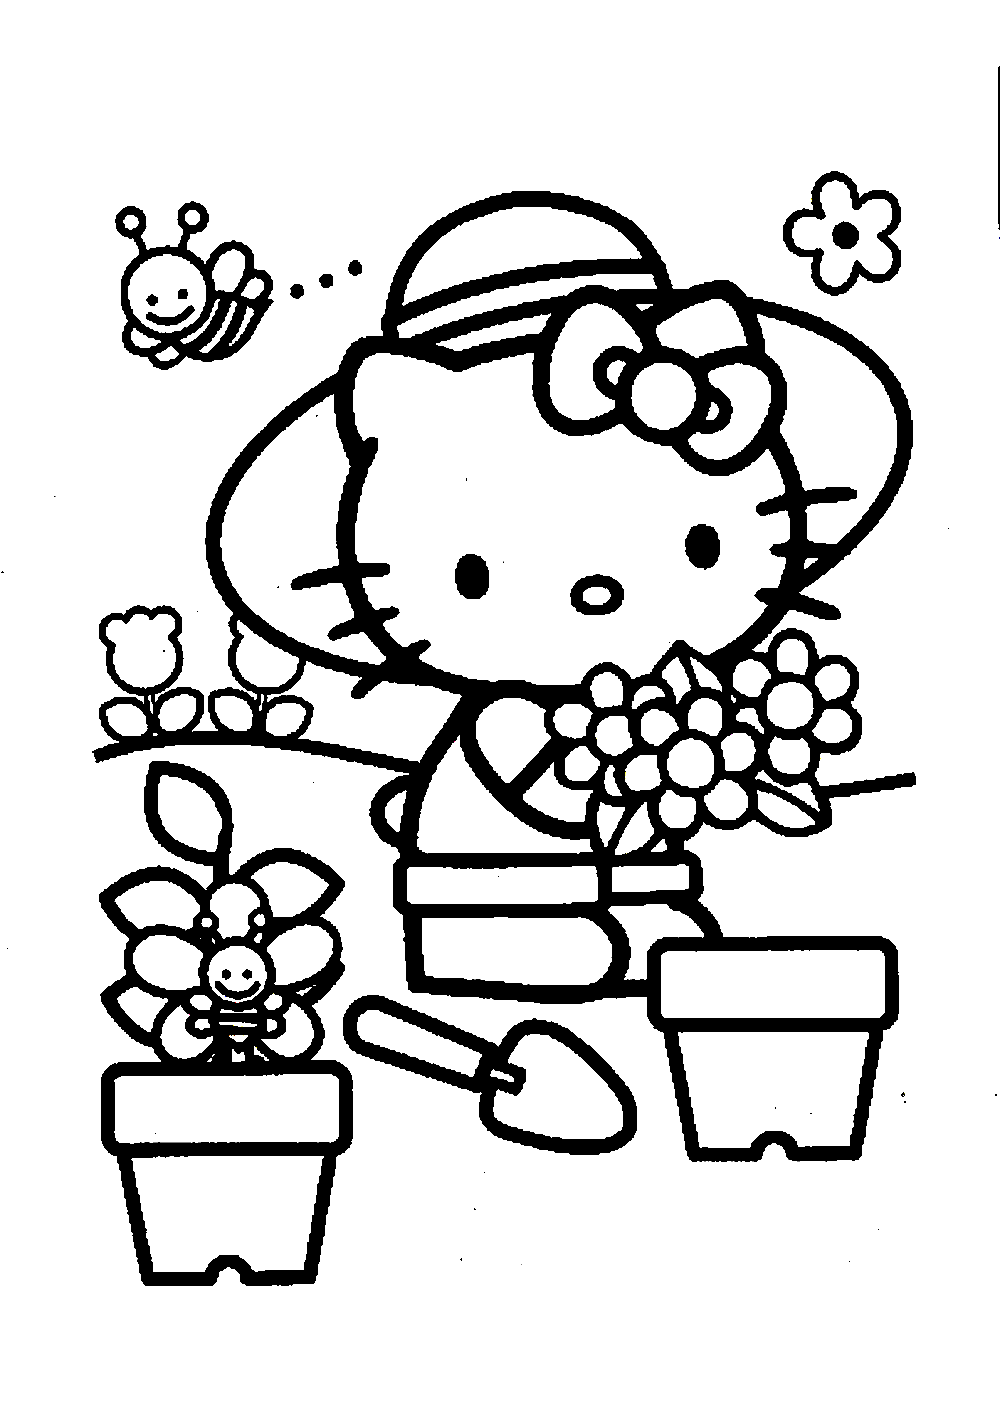 Gardener Hello Kitty Coloring Page